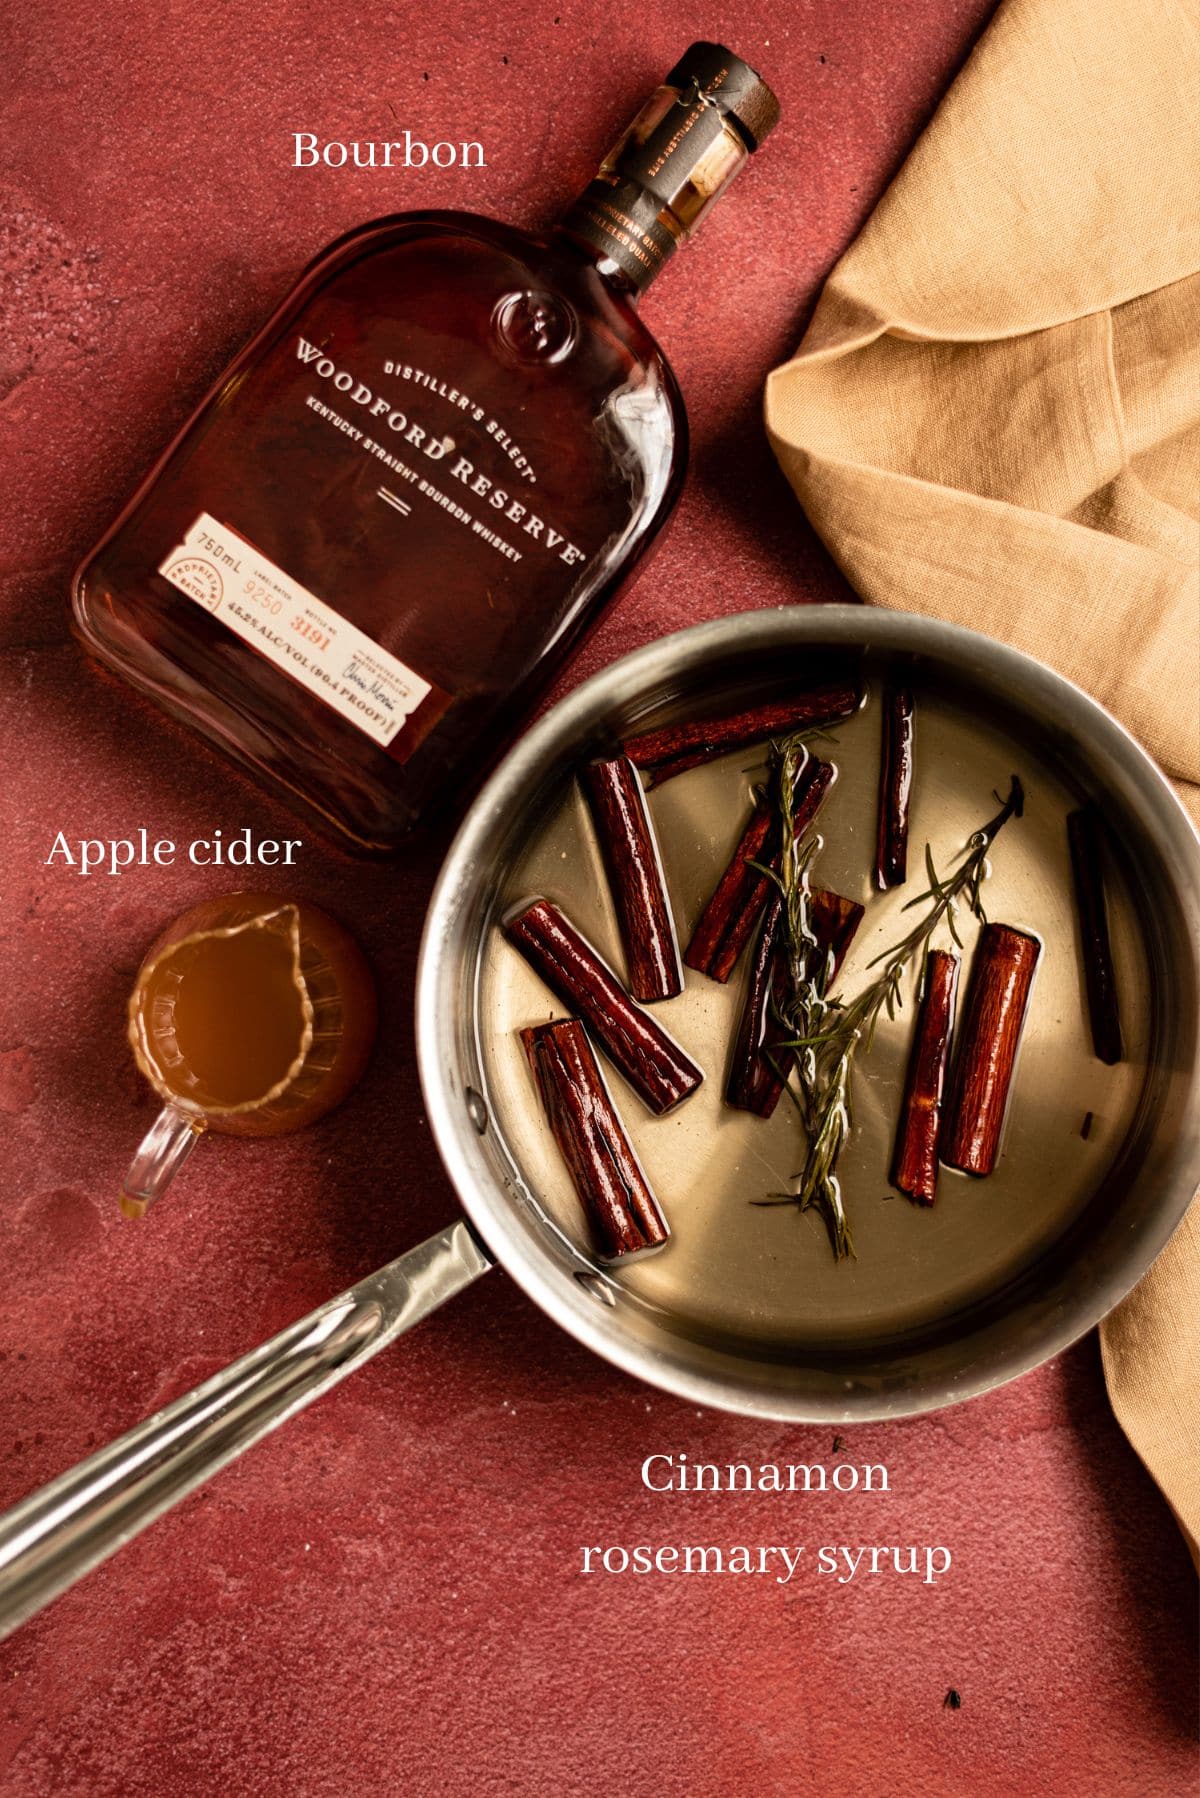 The ingredients for the old fashioned on a red table.